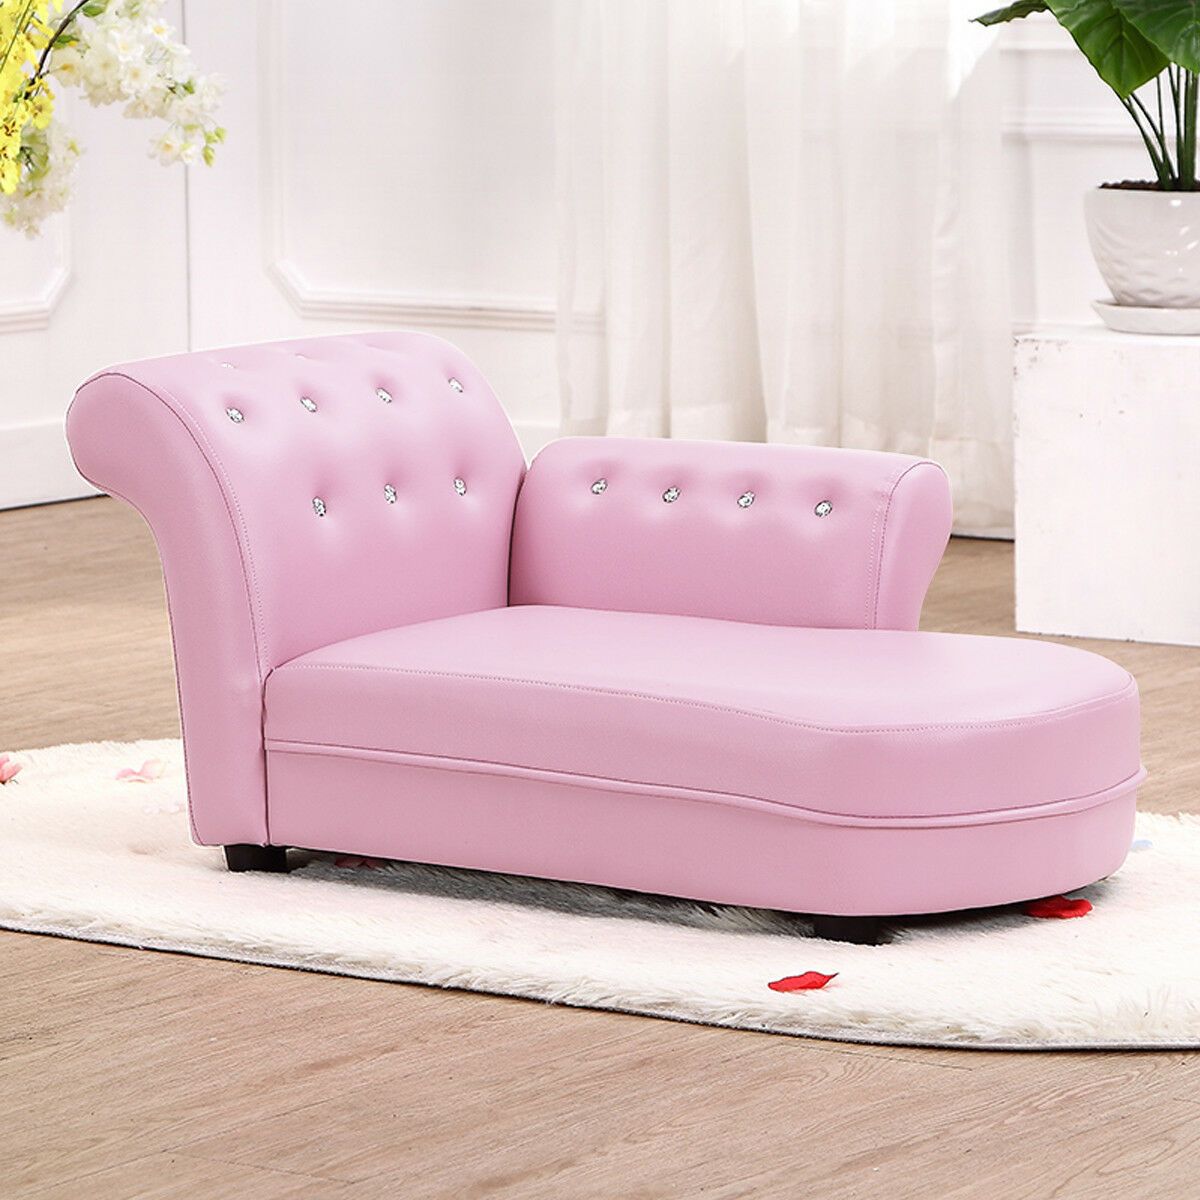 

Costway Pink Kids Sofa Chaise Lounge Armrest Chair Relax Couch Bedroom Living Room